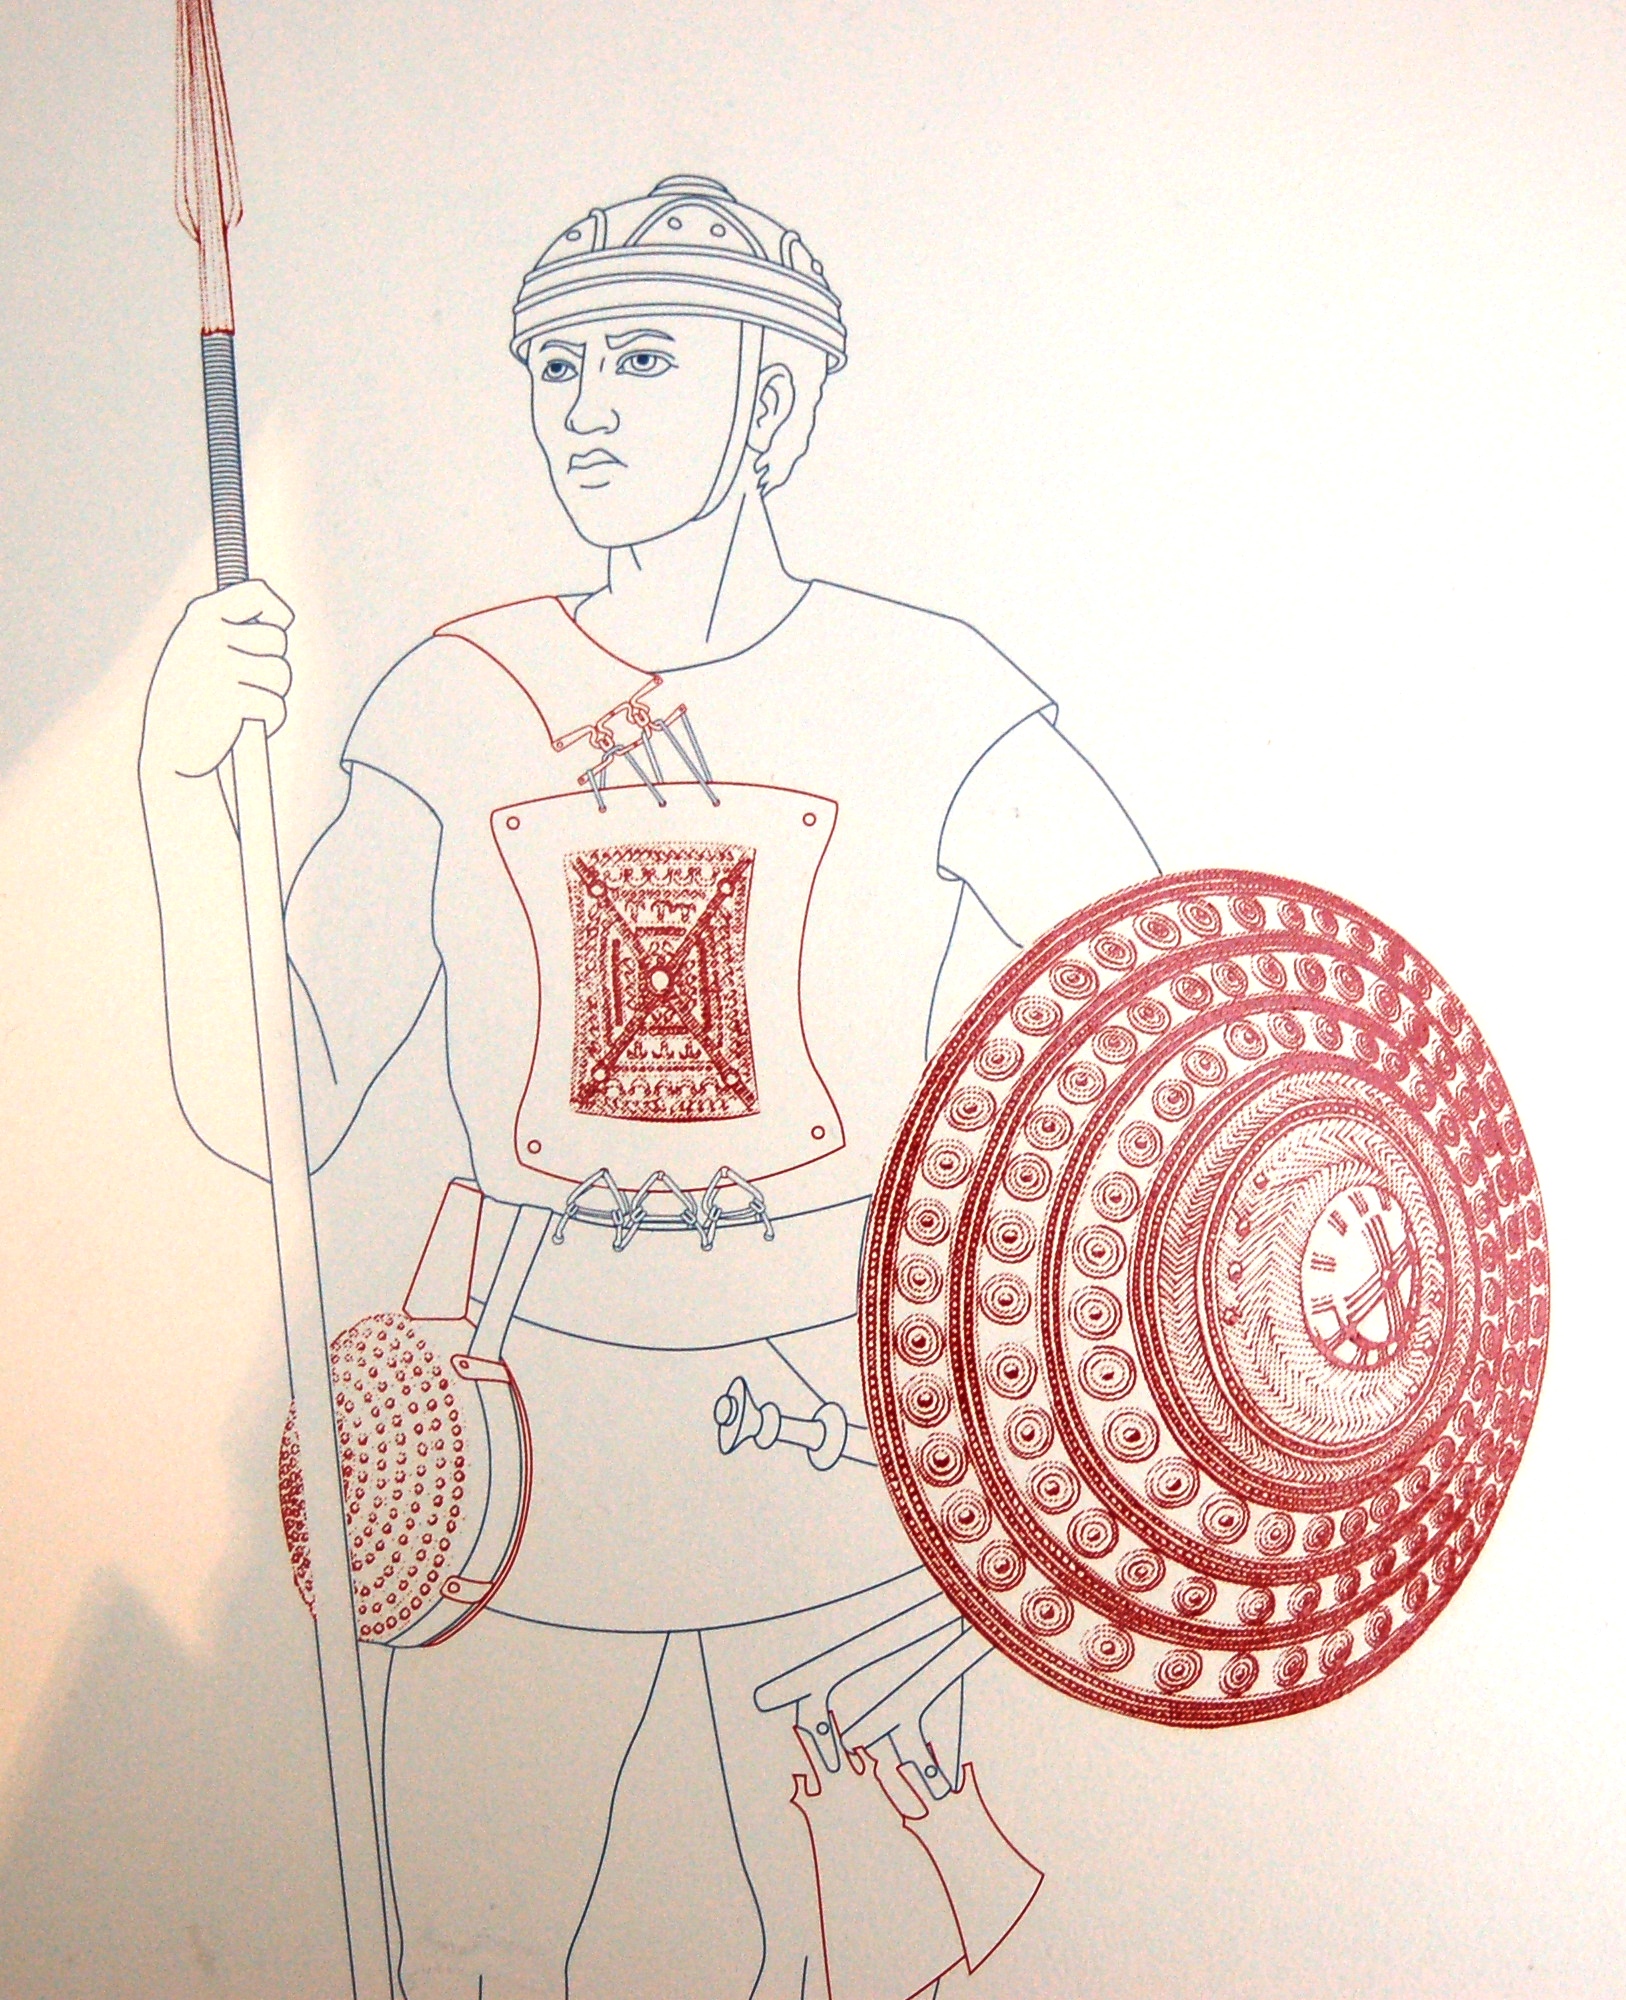  Etruscan soldier's military gear illustration.  Berlin Altes Museum 